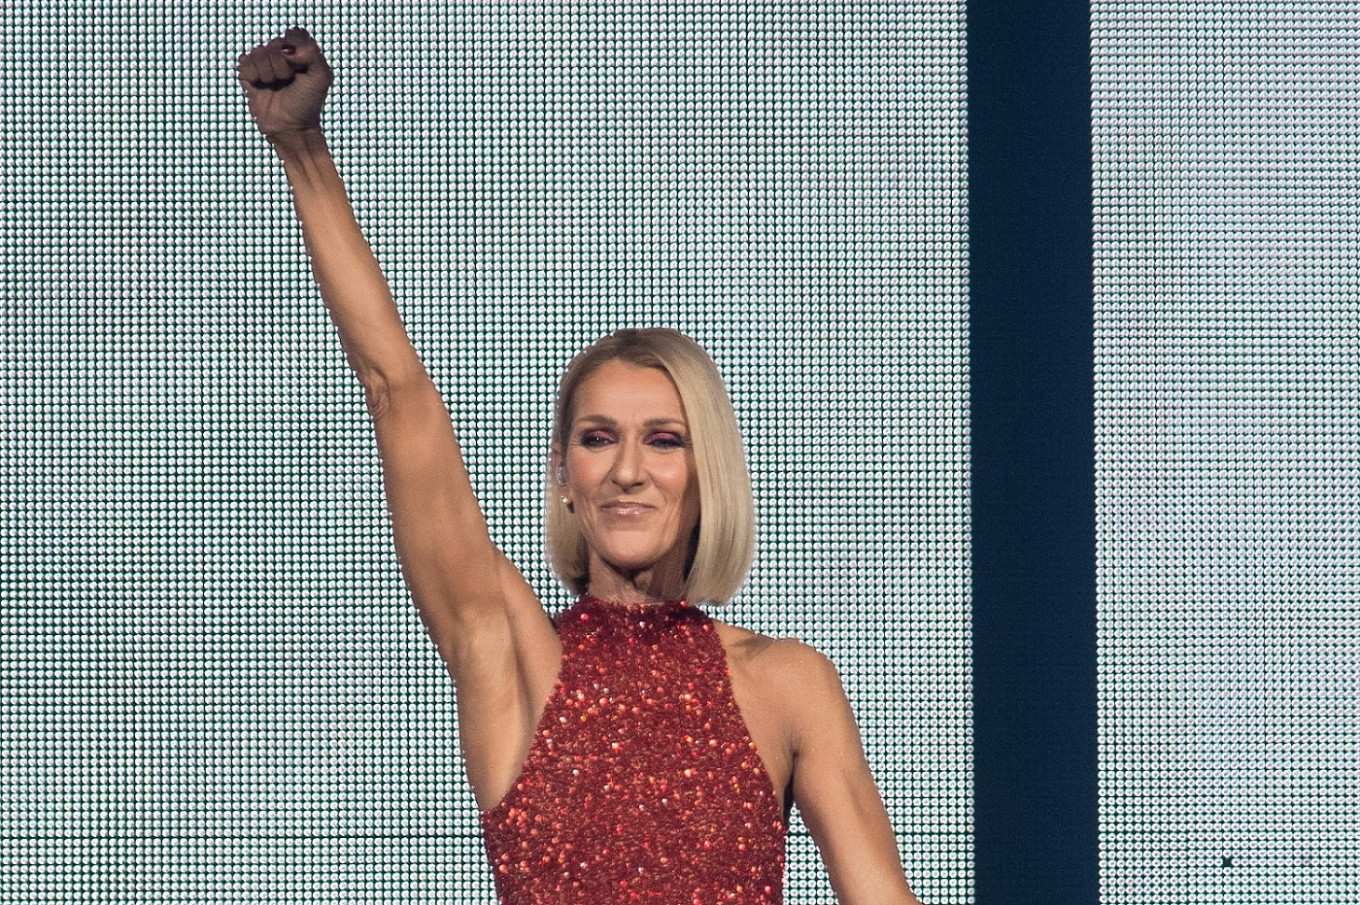 Celine Dion salutes 'heroic' workers in pandemic fight - Entertainment - The Jakarta Post